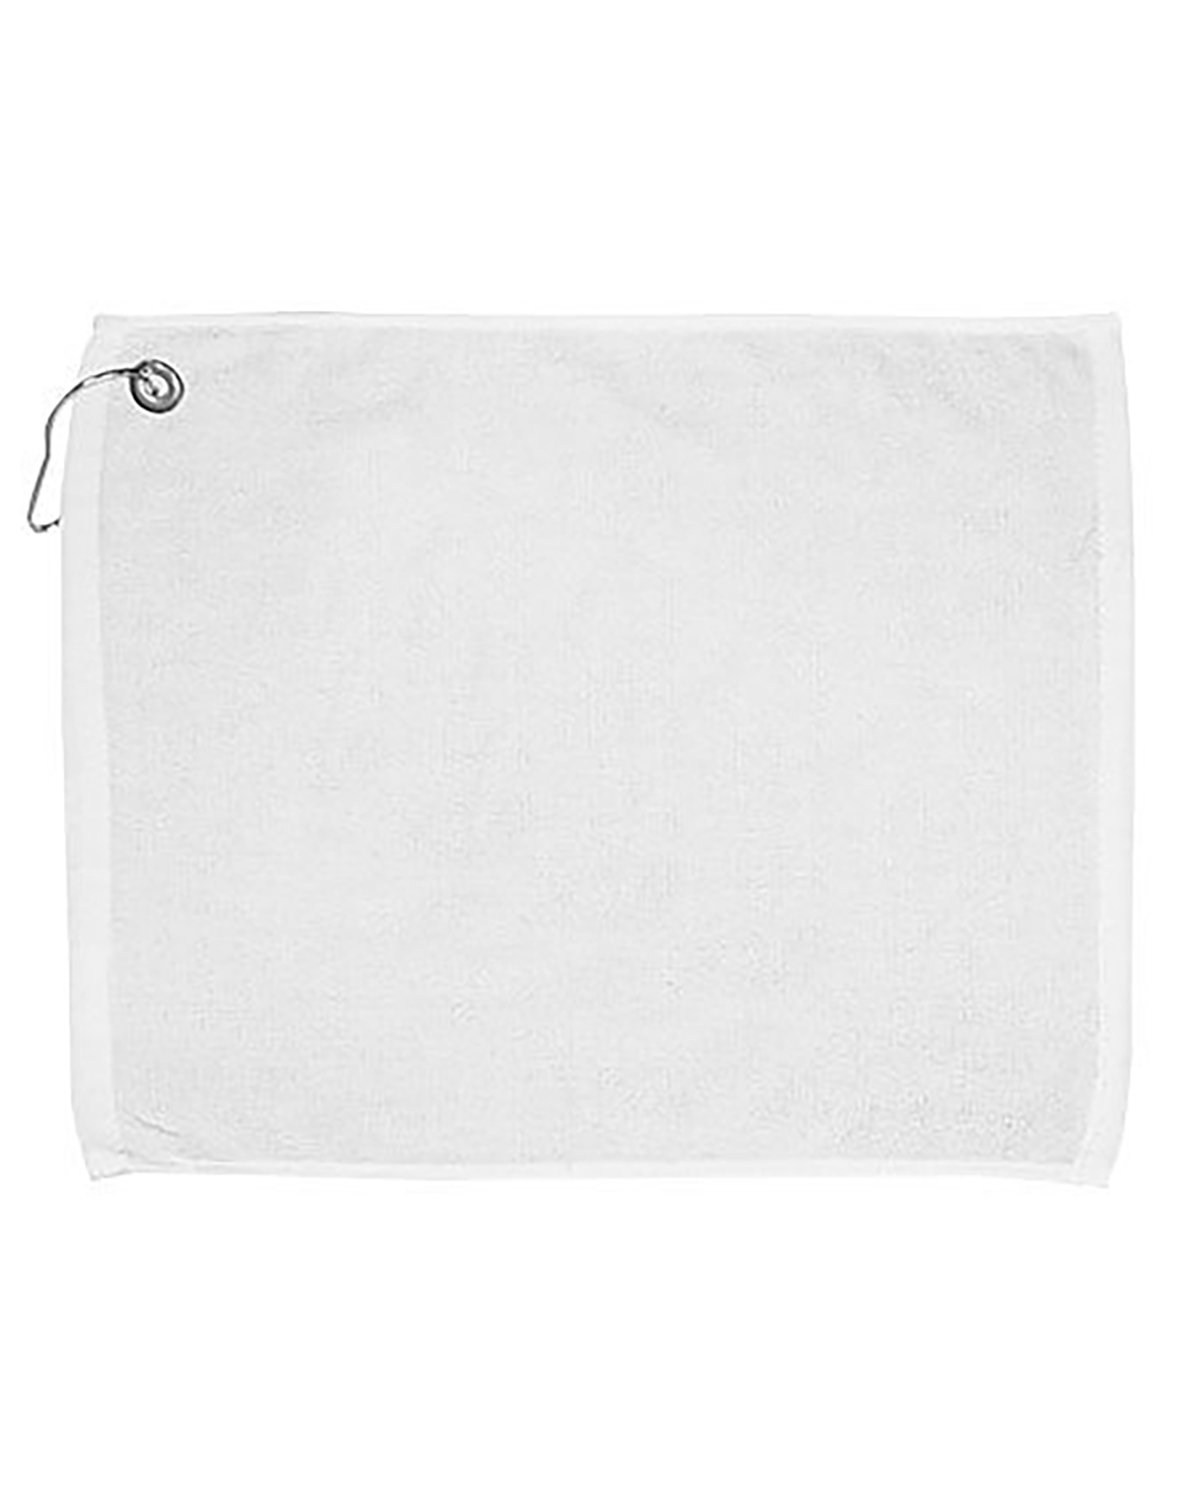 Golf Towel With Grommet And Hook-Carmel Towel Company